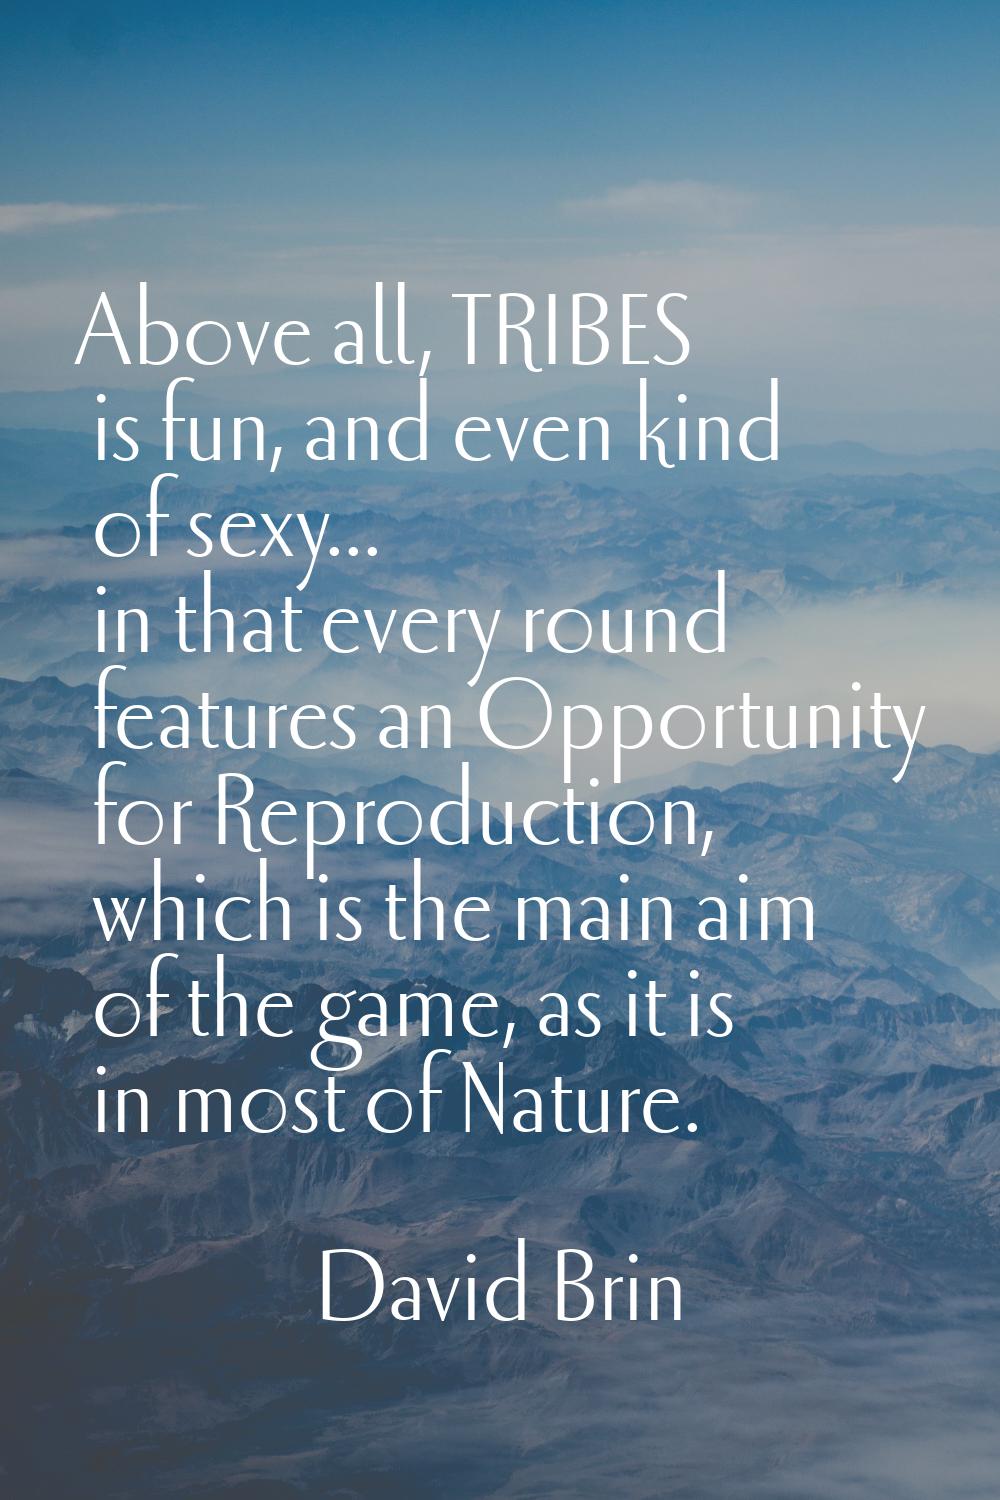 Above all, TRIBES is fun, and even kind of sexy... in that every round features an Opportunity for 